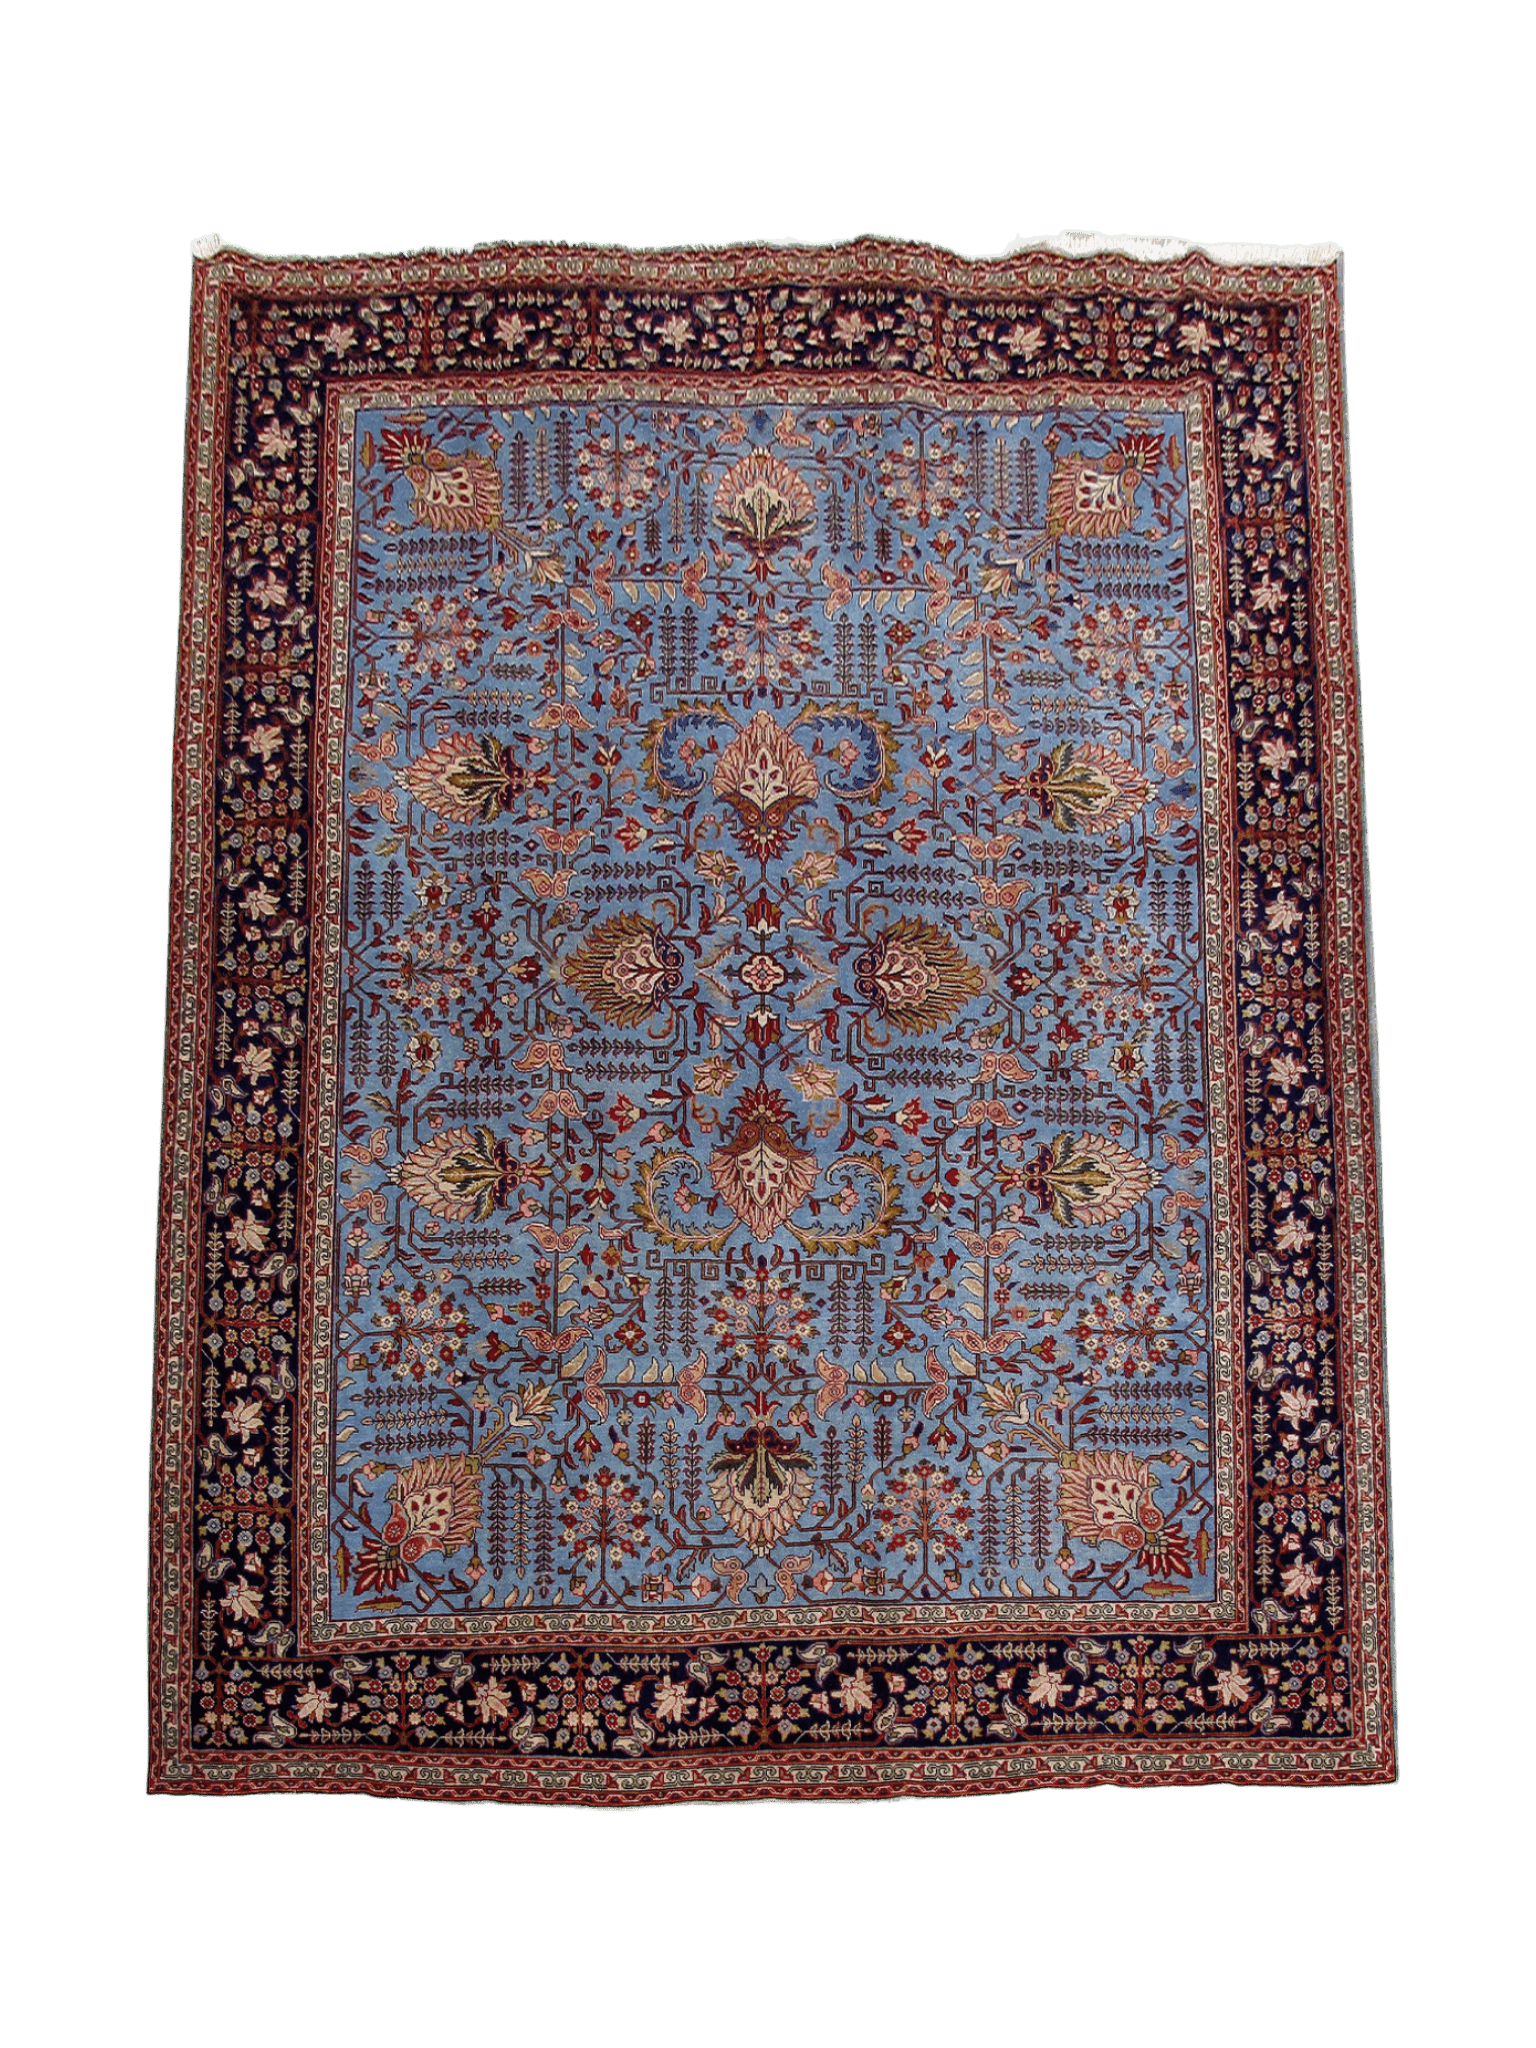 Vintage French Blue Rug # 3166 | 9’ 9” x 12’ 10” - Krazy For Rugs